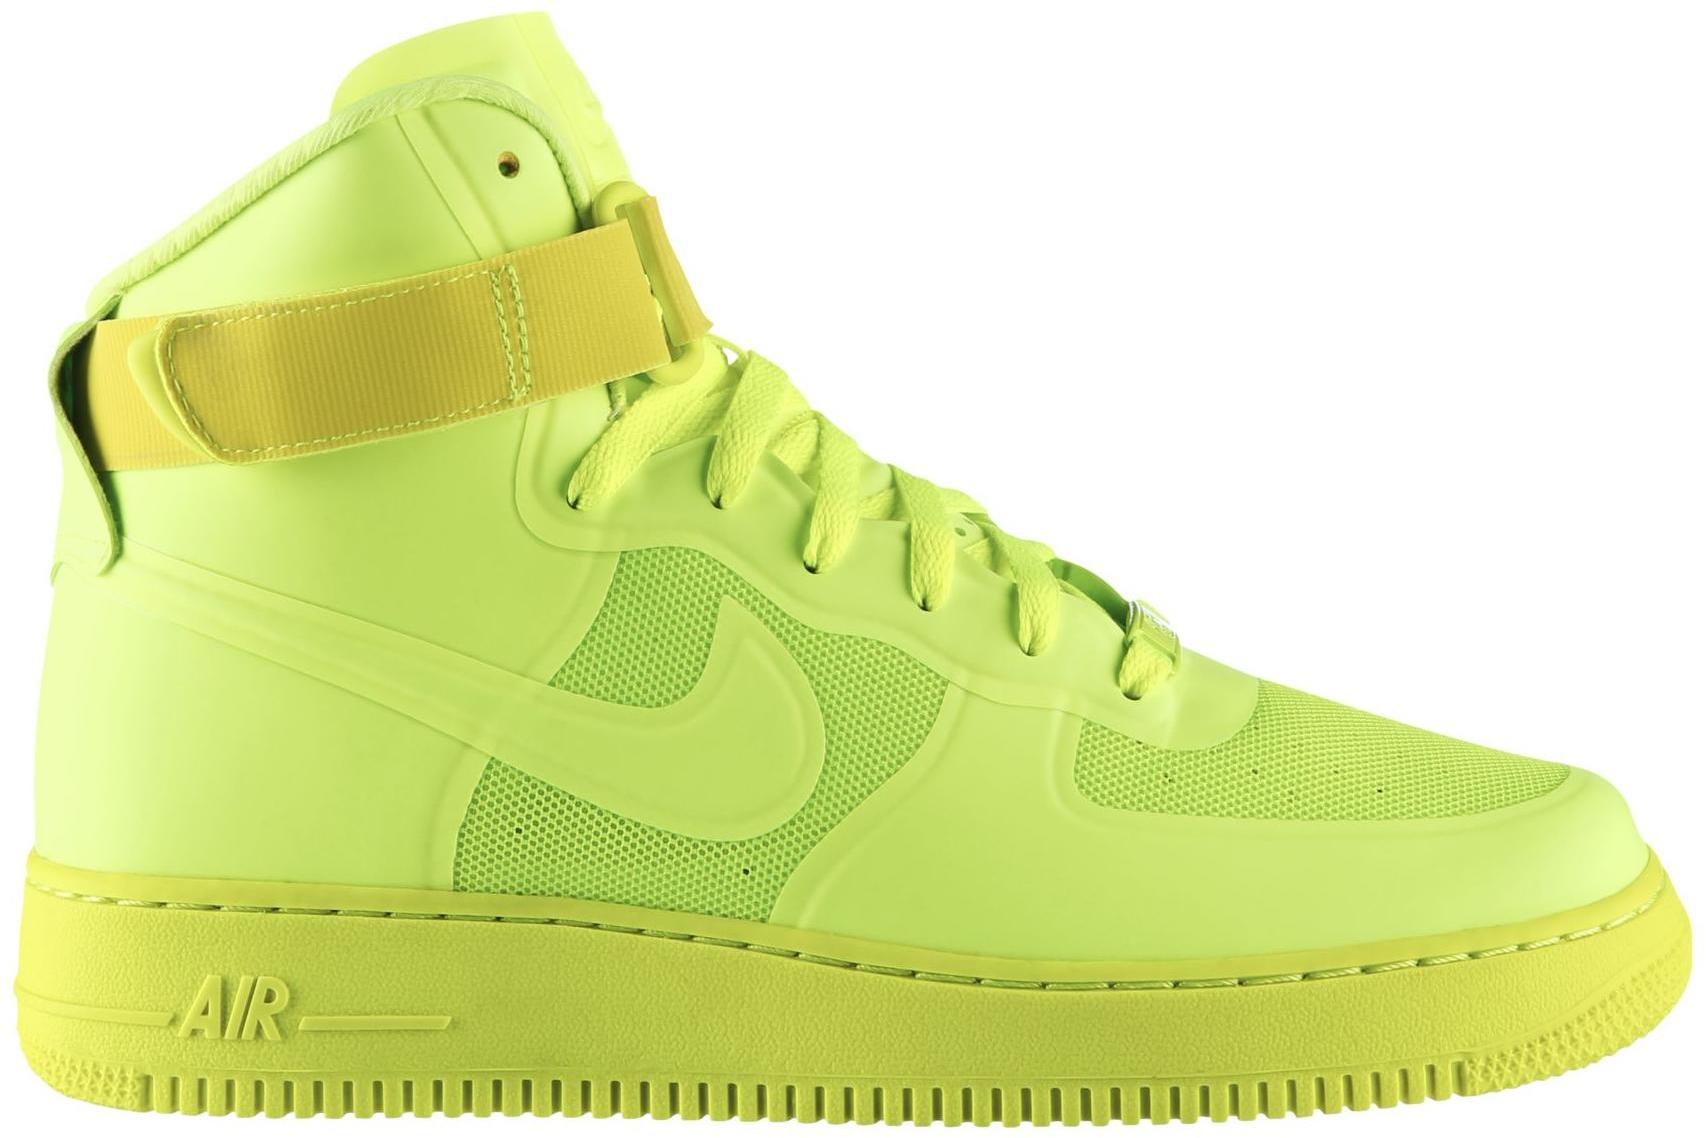 Nike Air Force 1 High Hyperfuse Volt Men's - 454433-700 - US